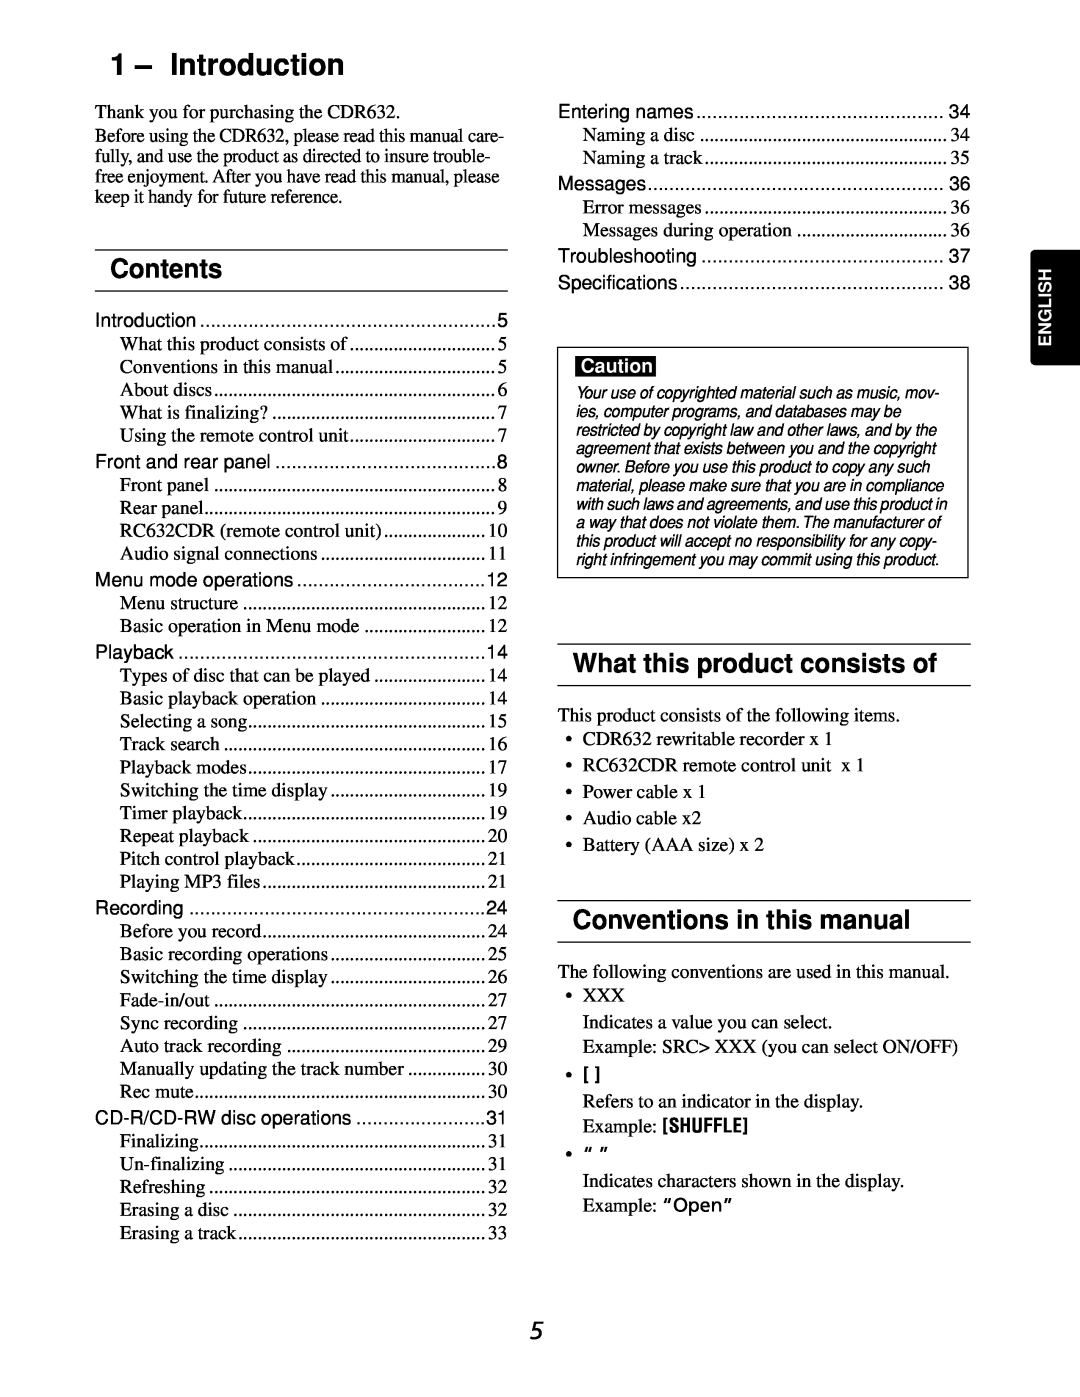 Marantz CDR632 Introduction, Contents, What this product consists of, Conventions in this manual 